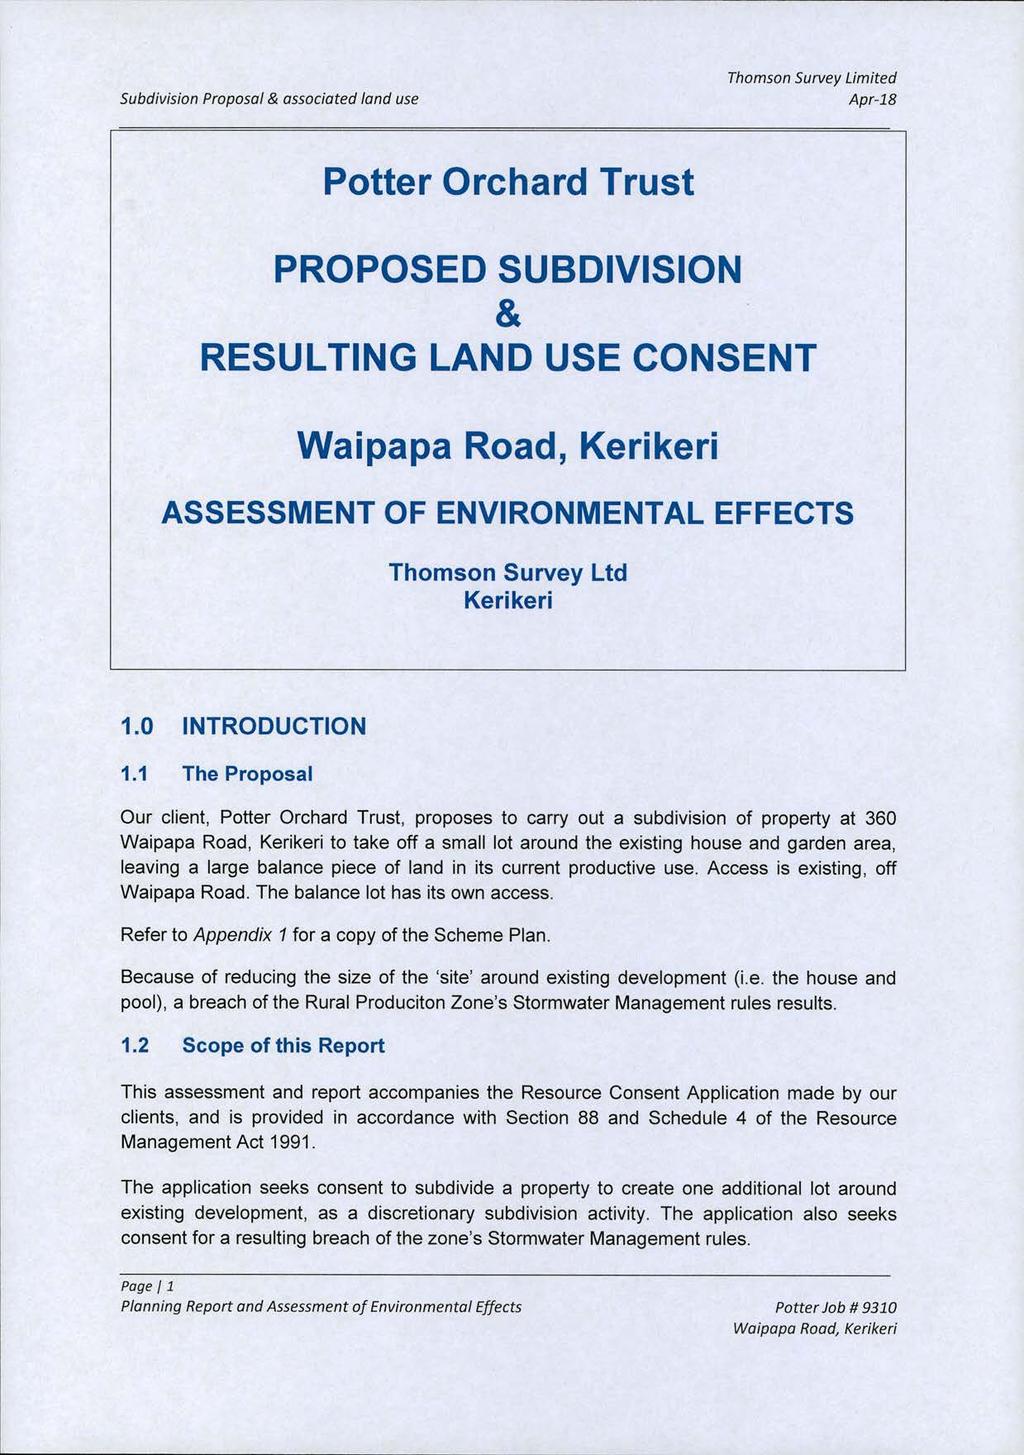 Subdivision Proposal & associated land use Thomson Survey Limited Apr-18 Potter Orchard Trust PROPOSED SUBDIVISION & RESULTING LAND USE CONSENT ASSESSMENT OF ENVIRONMENTAL EFFECTS Thomson Survey Ltd